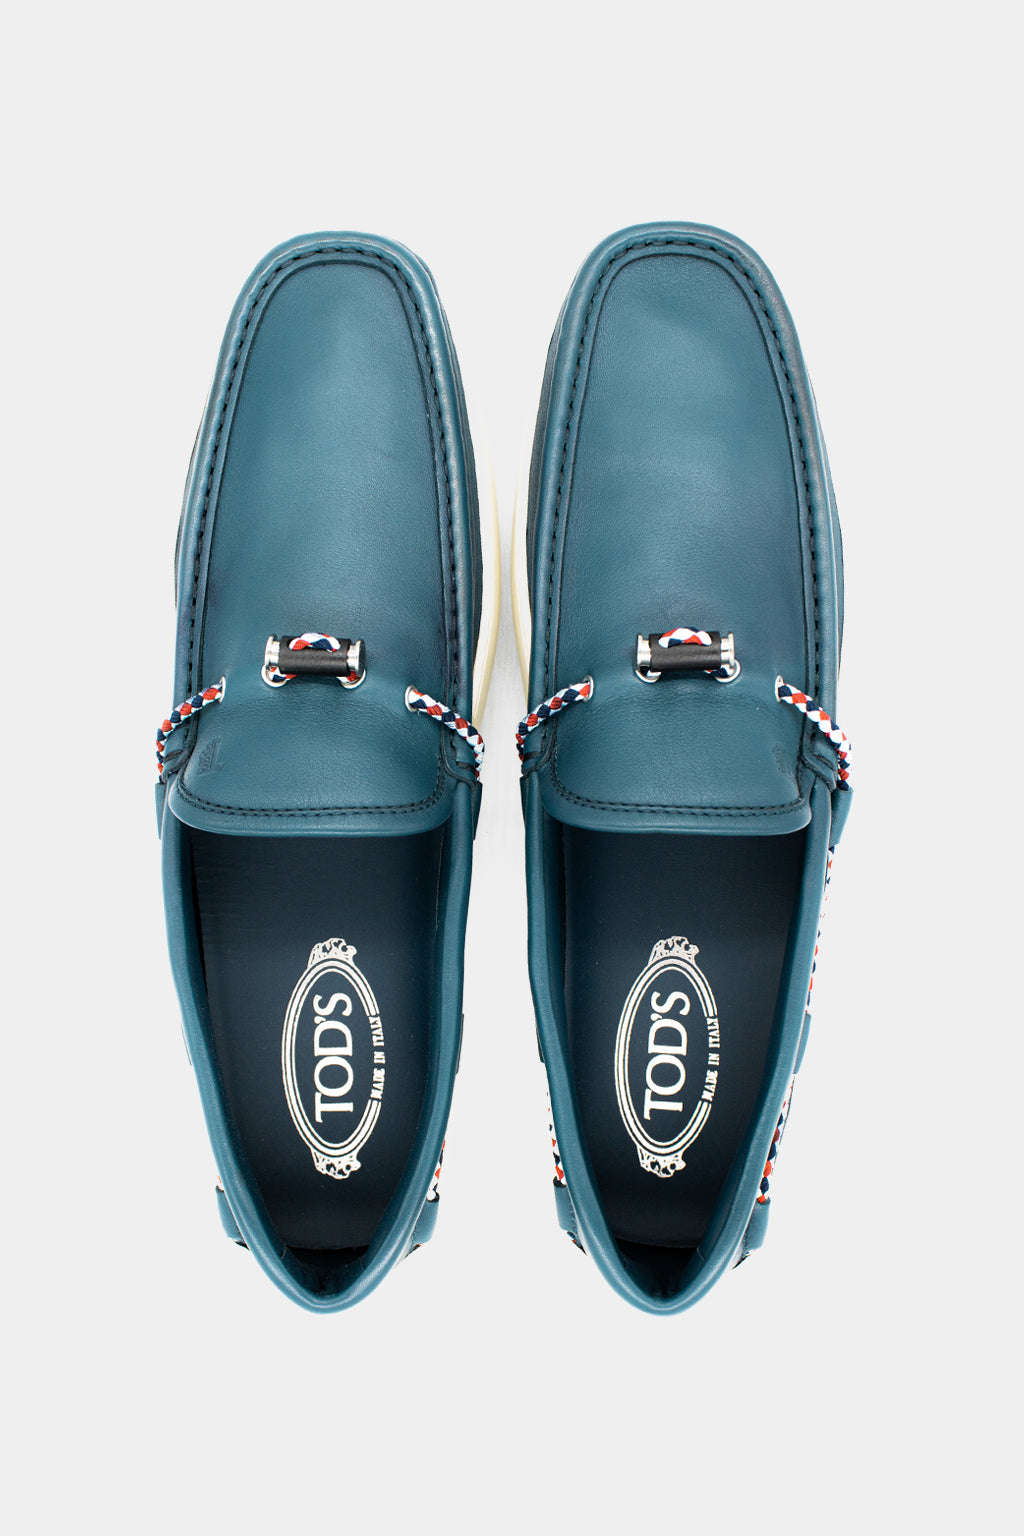 Tod's - Men's Light Blue Gommino Leather Loafers